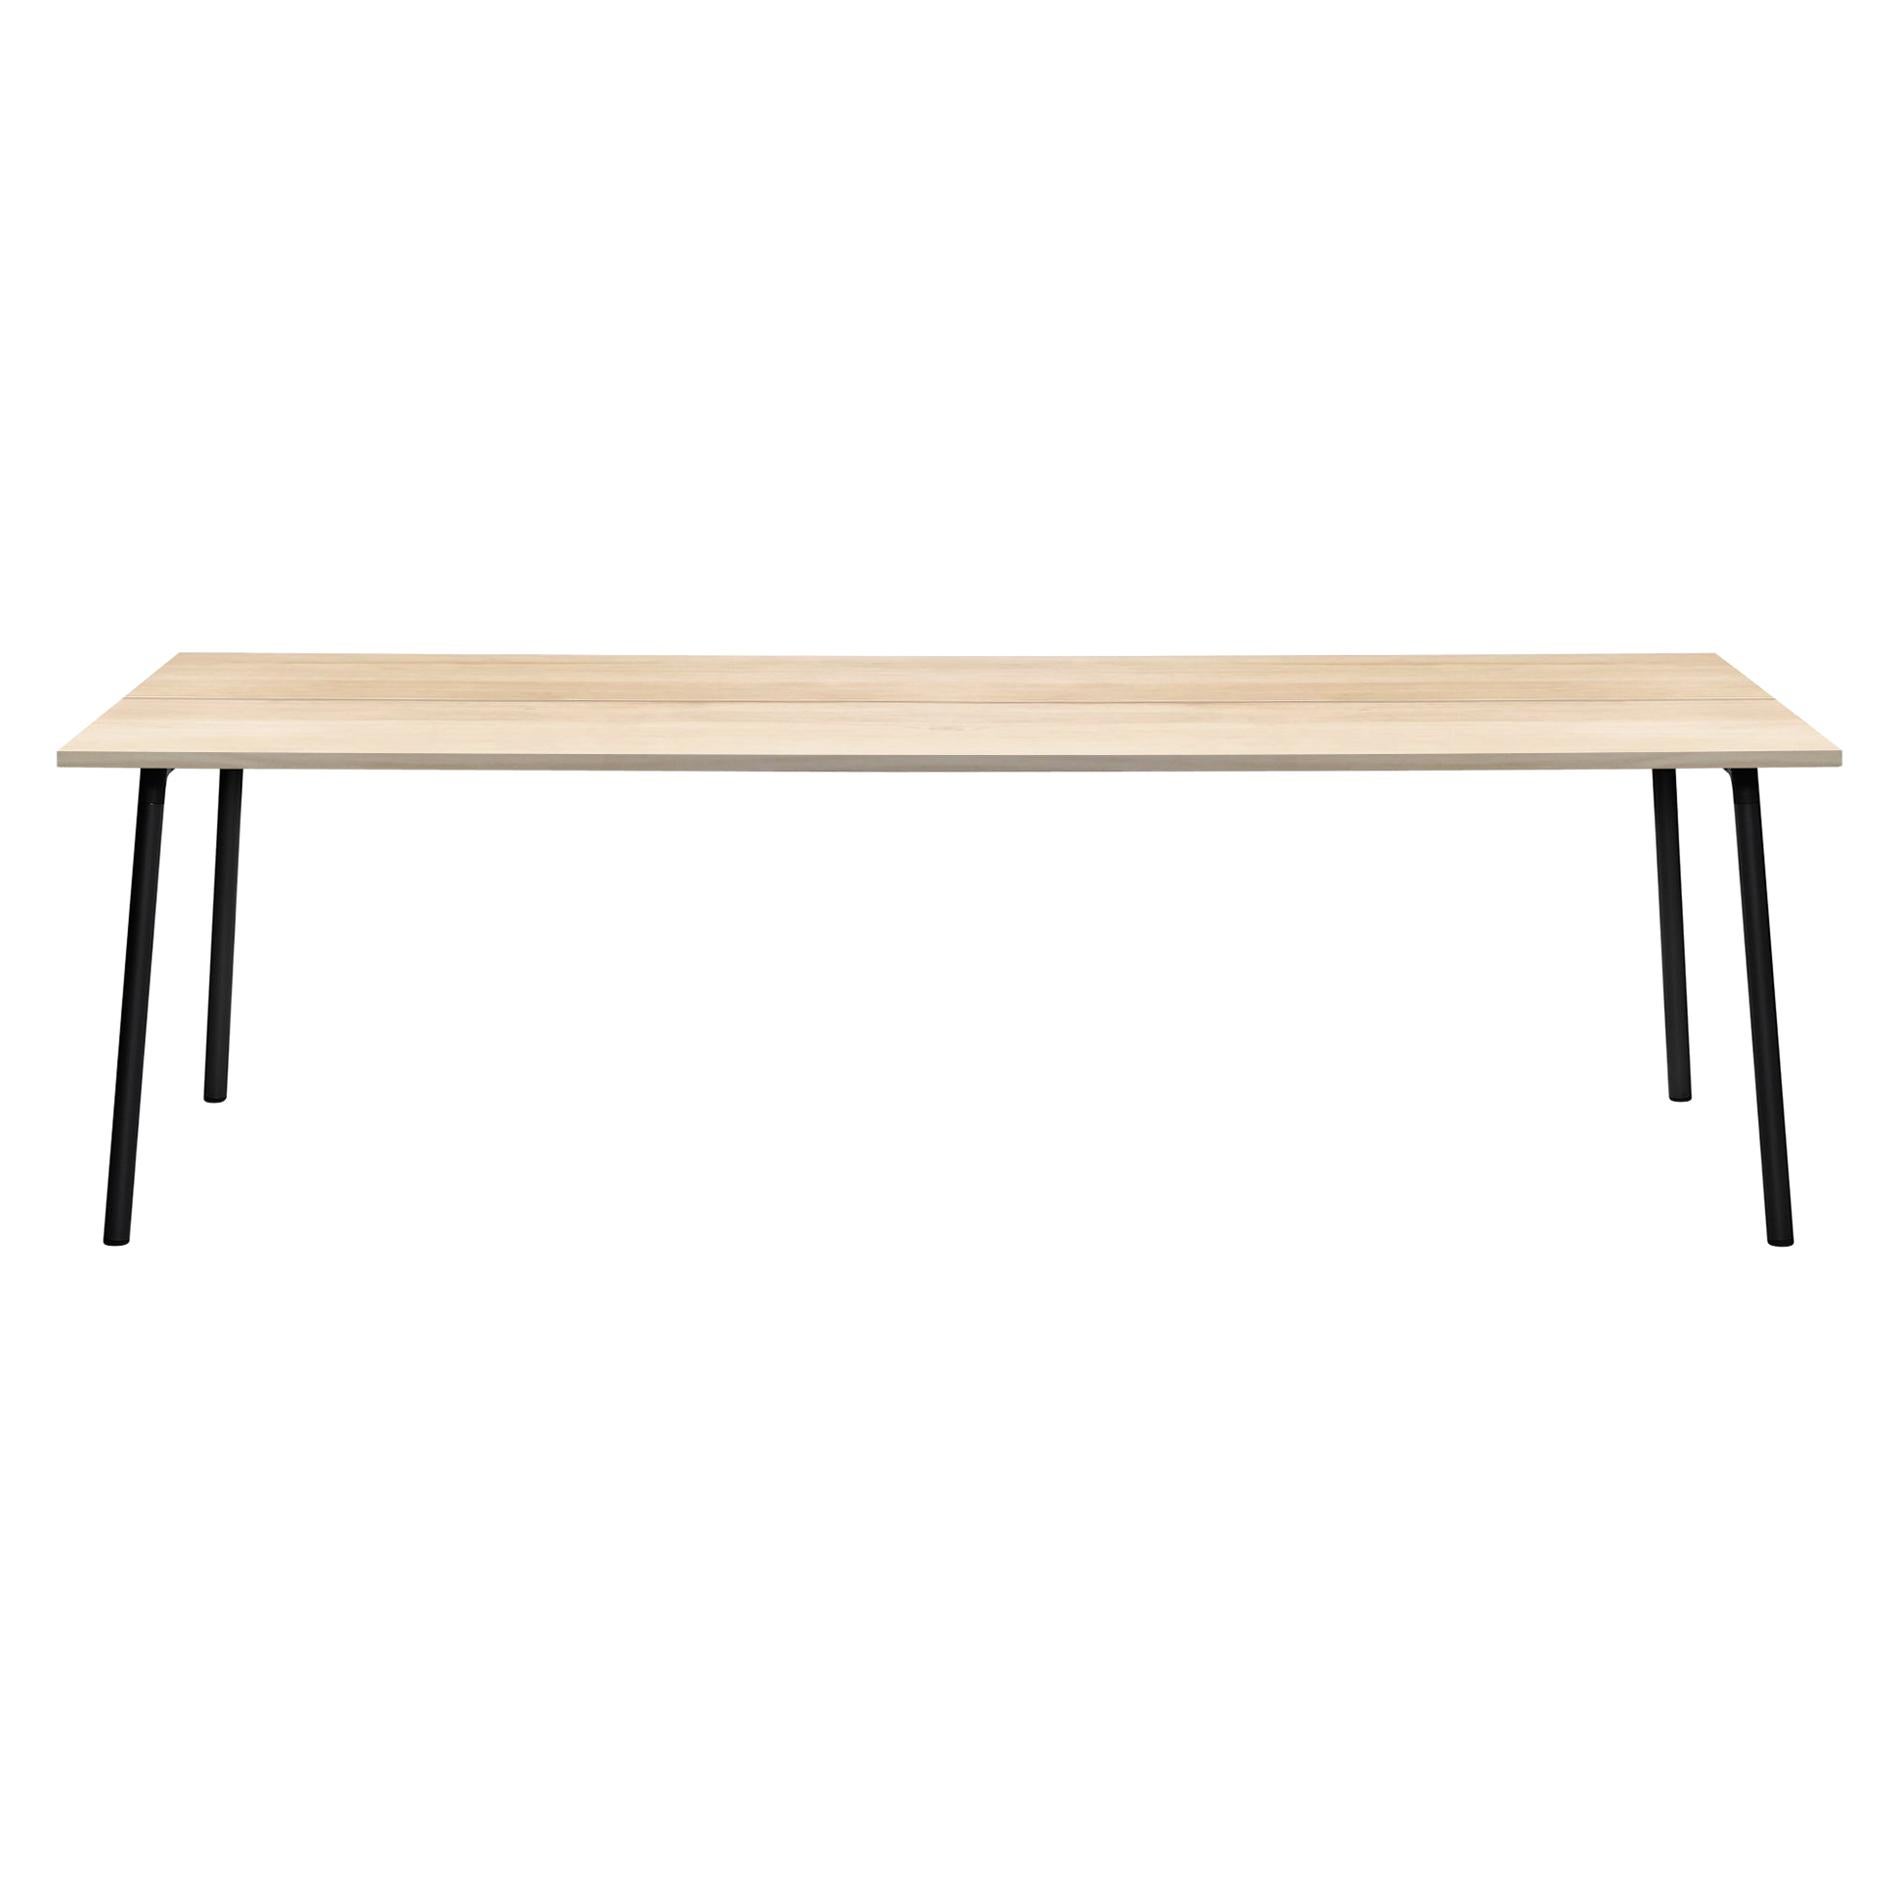 Emeco Run 96" Table with Black Frame & Wood Top by Sam Hecht and Kim Colin For Sale